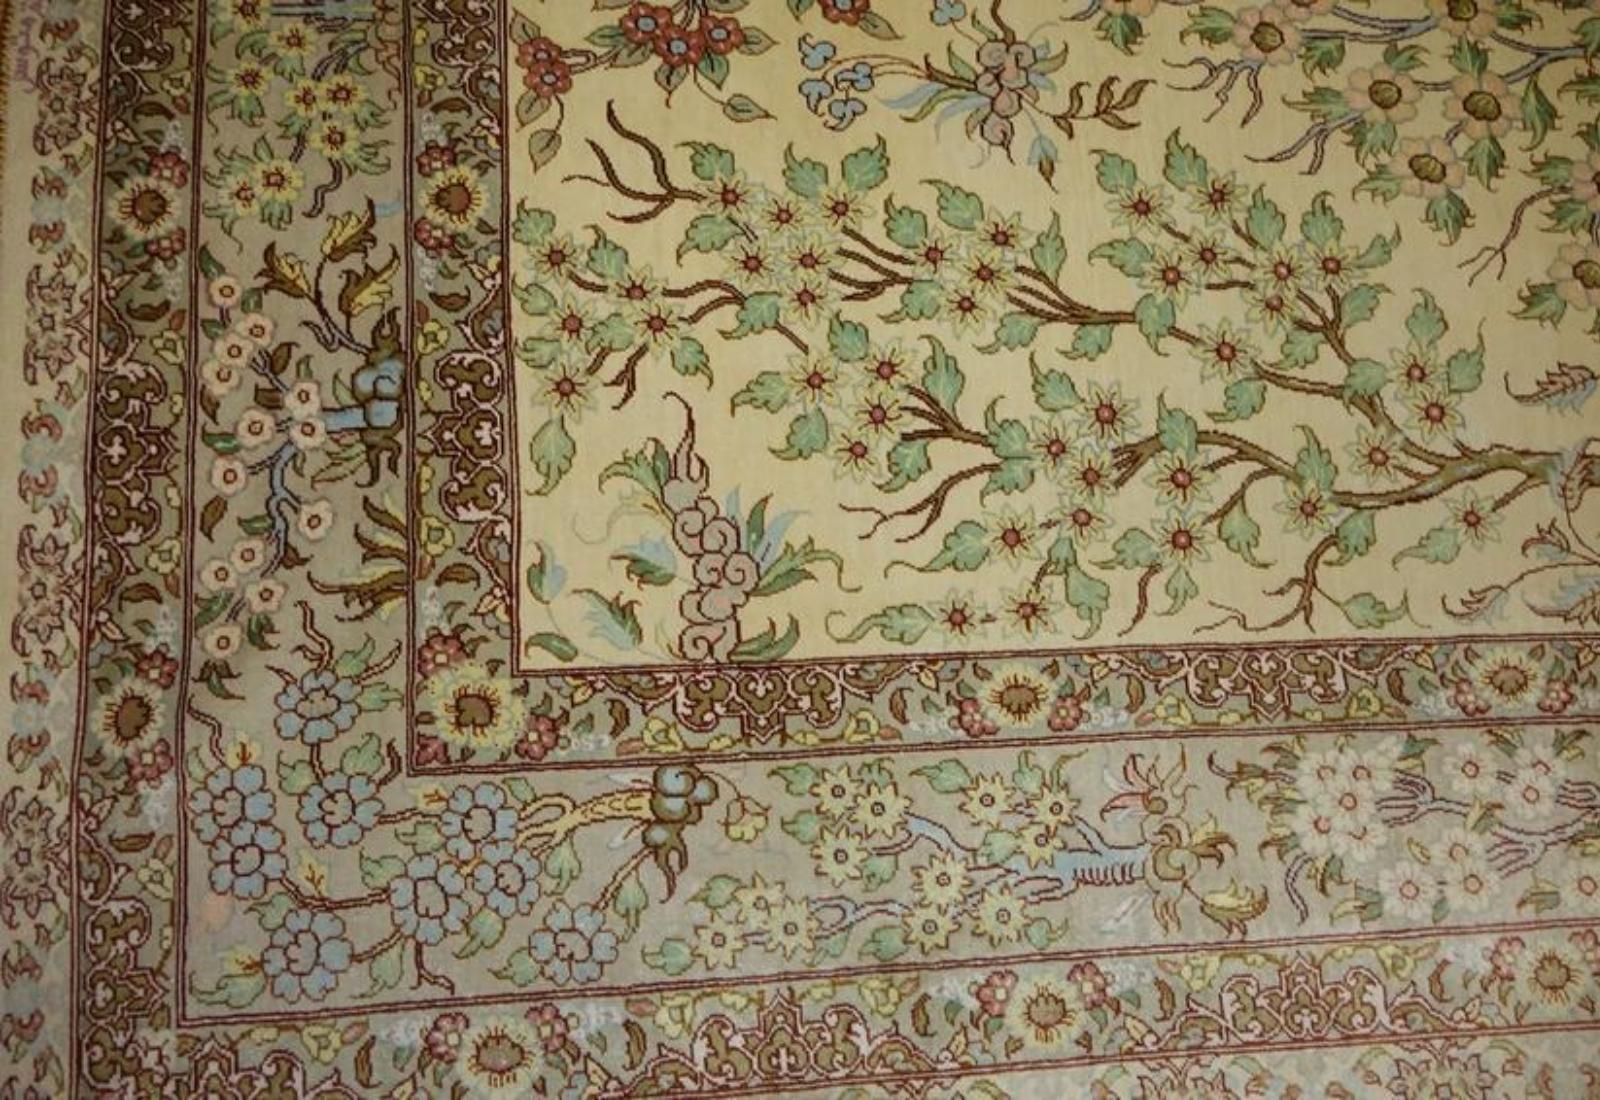 Very fine Persian Silk Qum - 6.5' 4.4' In Good Condition For Sale In Newmanstown, PA